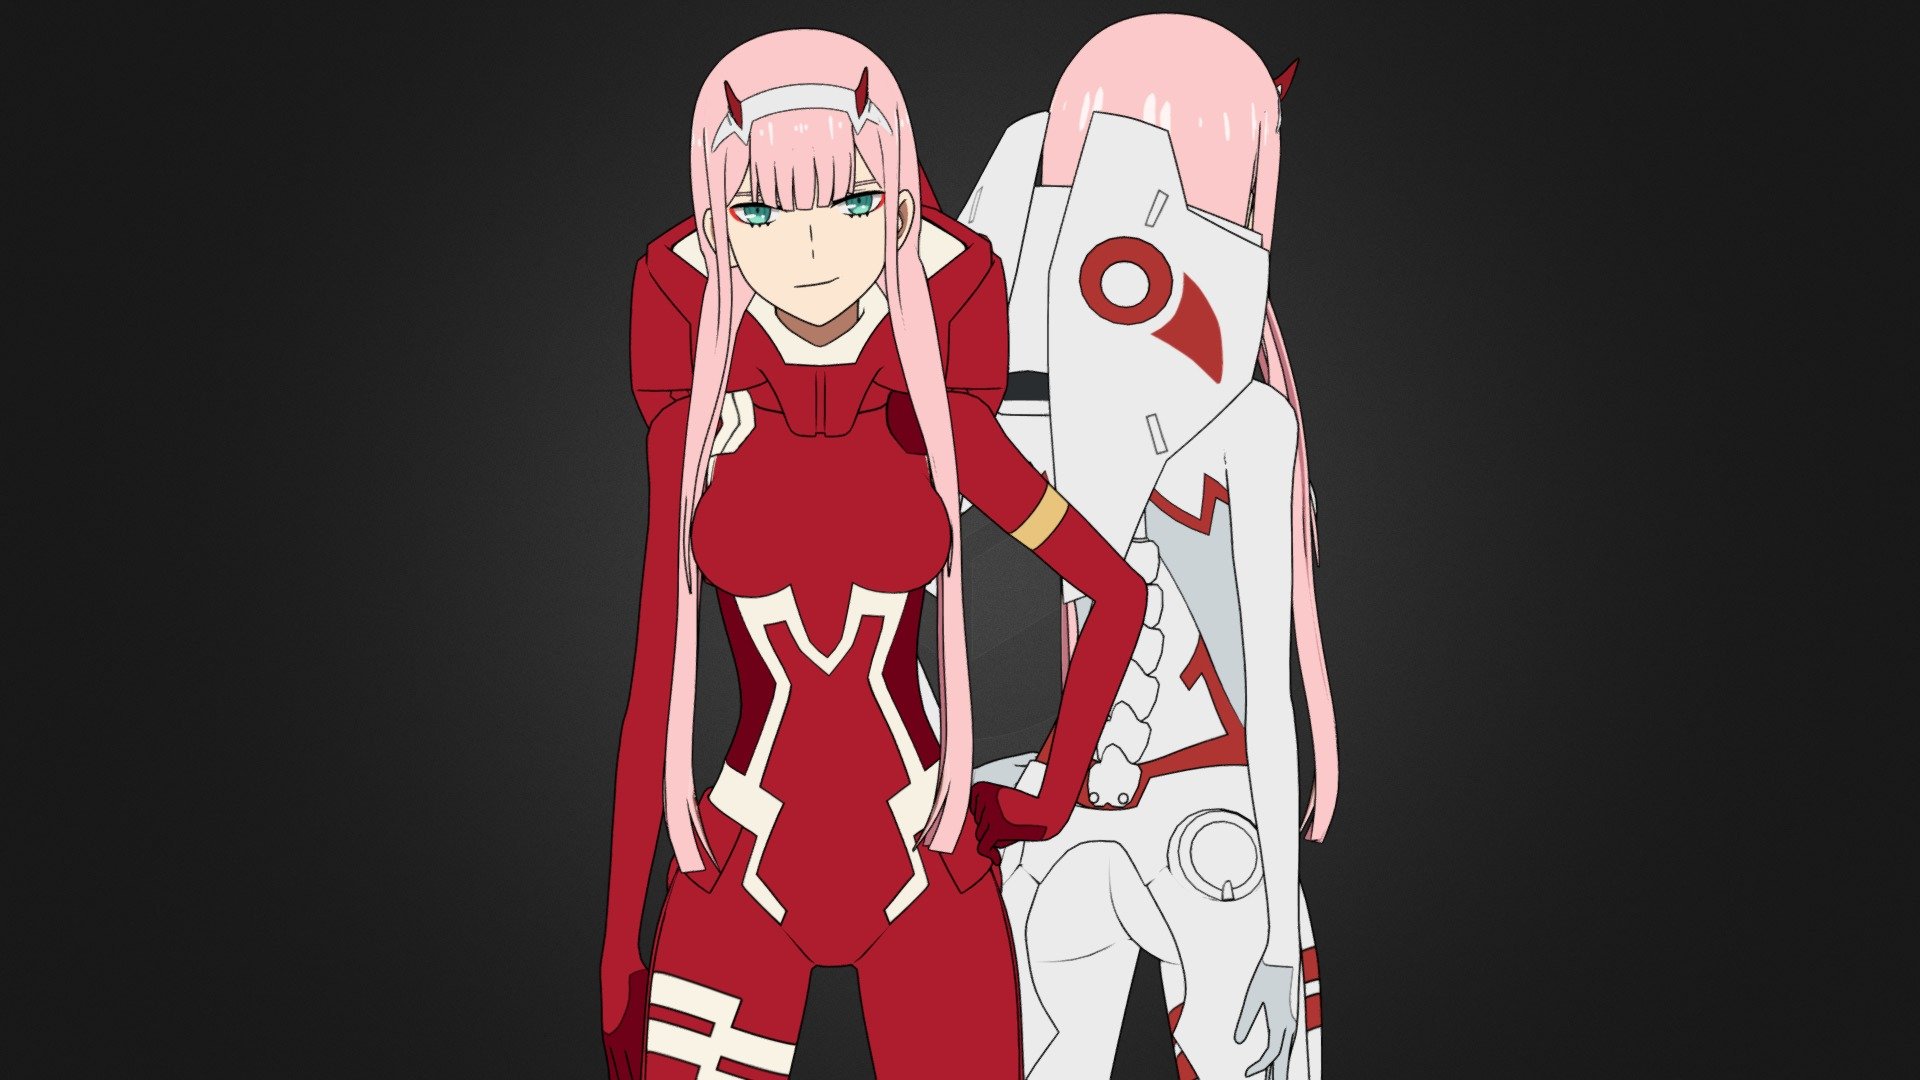 Zero Two (battle suit version) character from the anime Darling in the Franxx.

3D Model Rigged. With Shape Keys. In blend format, for Blender v2.8 - v3.1. EEVEE renderer, with nodes, material Toon Shader.

Includes both clothing variations (White and Red).

▬▬▬▬▬▬▬▬▬▬▬▬▬▬▬▬▬▬▬▬▬▬▬▬▬▬▬▬▬▬▬▬▬▬▬▬▬▬▬▬▬▬▬▬▬▬

Buy Artstation: https://www.artstation.com/a/16672211

Buy CGTrader: encurtador.com.br/wN358

▬▬▬▬▬▬▬▬▬▬▬▬▬▬▬▬▬▬▬▬▬▬▬▬▬▬▬▬▬▬▬▬▬▬▬▬▬▬▬▬▬▬▬▬▬▬

Contents of the .blend file:

● Full body, no deleted parts.

● Individual Hair, separated from the body.

● Pieces of Clothing, separated from the body (Individuals, Can be removed.)

● Complete RIG, with all bones for movement. (Metarig Rigify Armature)

● Shape Keys.

● Materials configured with nodes.

● UV mapping.

● Textures embedded in the .blend file.

ATTENTION: THIS MODEL ONLY WORKS IN BLENDER 2.8 OR ABOVE.

Blender 2.7 does not open the file, however it can be append (imported) and changed the materials to work correctly 3d model